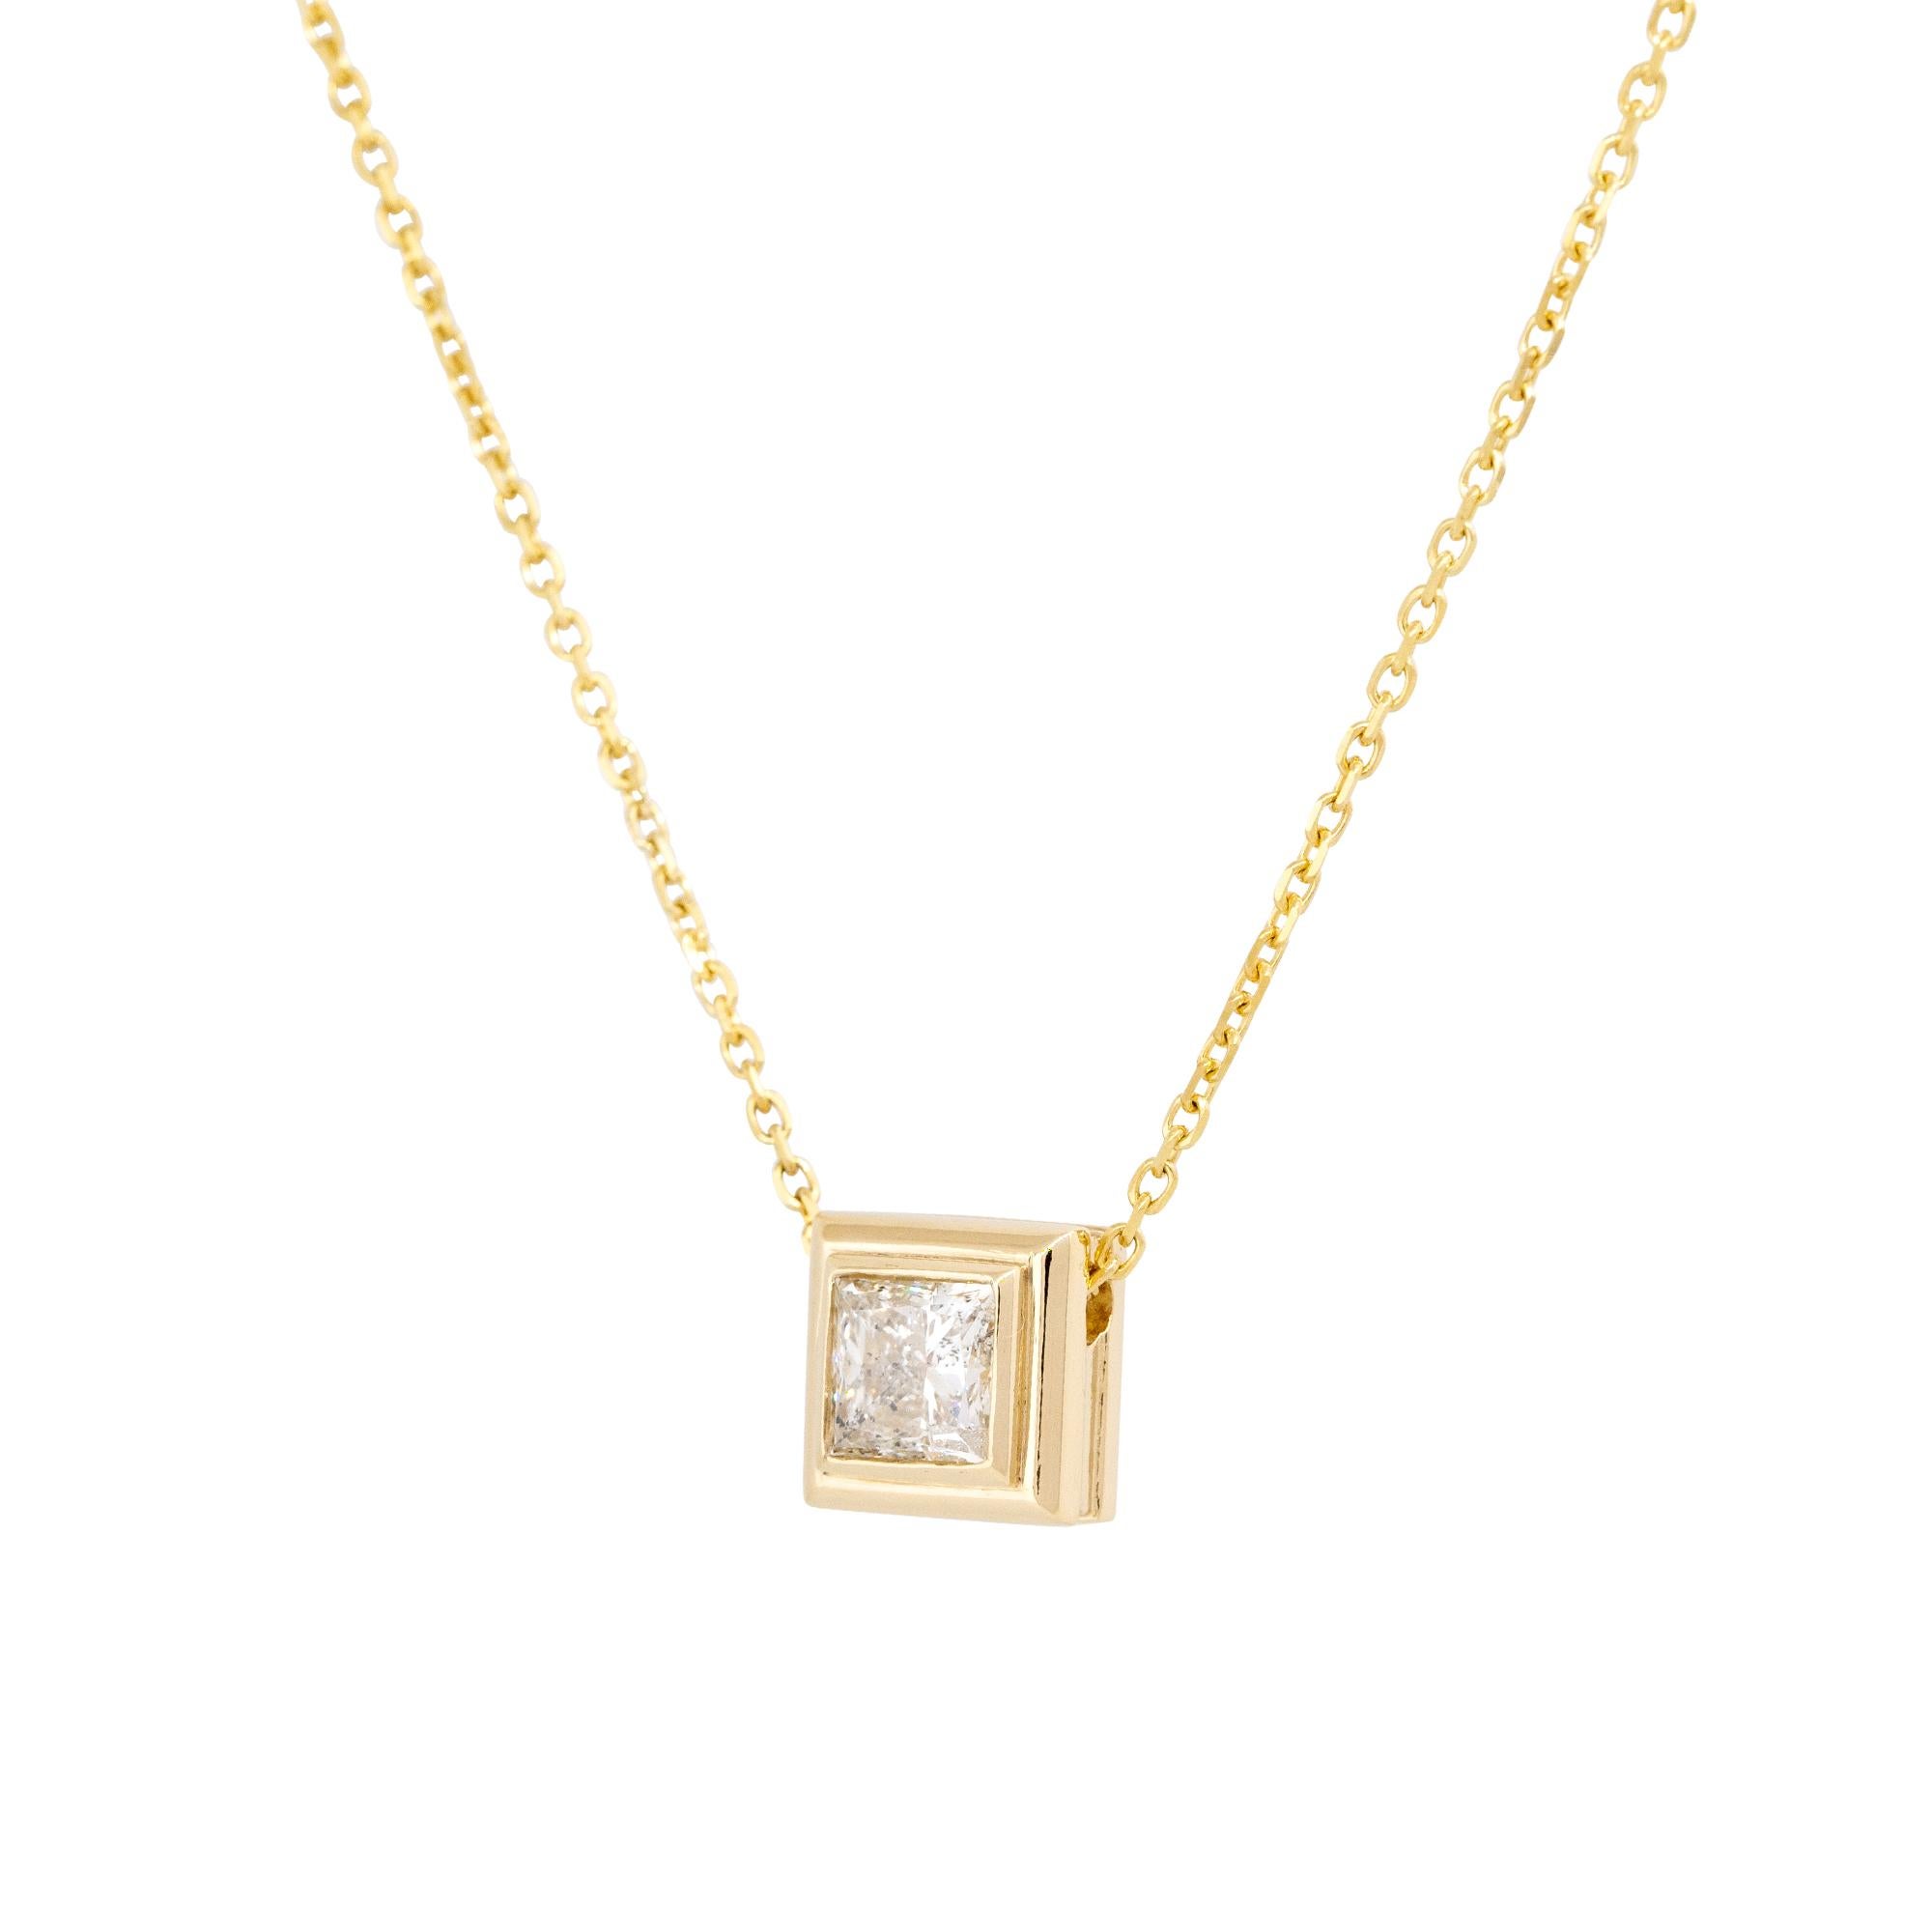 This lovely Princess cut diamond pendant necklace is a classic piece of jewelry.  It is set in 14 karat yellow gold and the center stone has some color, approximately J/K in color. This pendant can be worn layered with other pieces or necklaces and